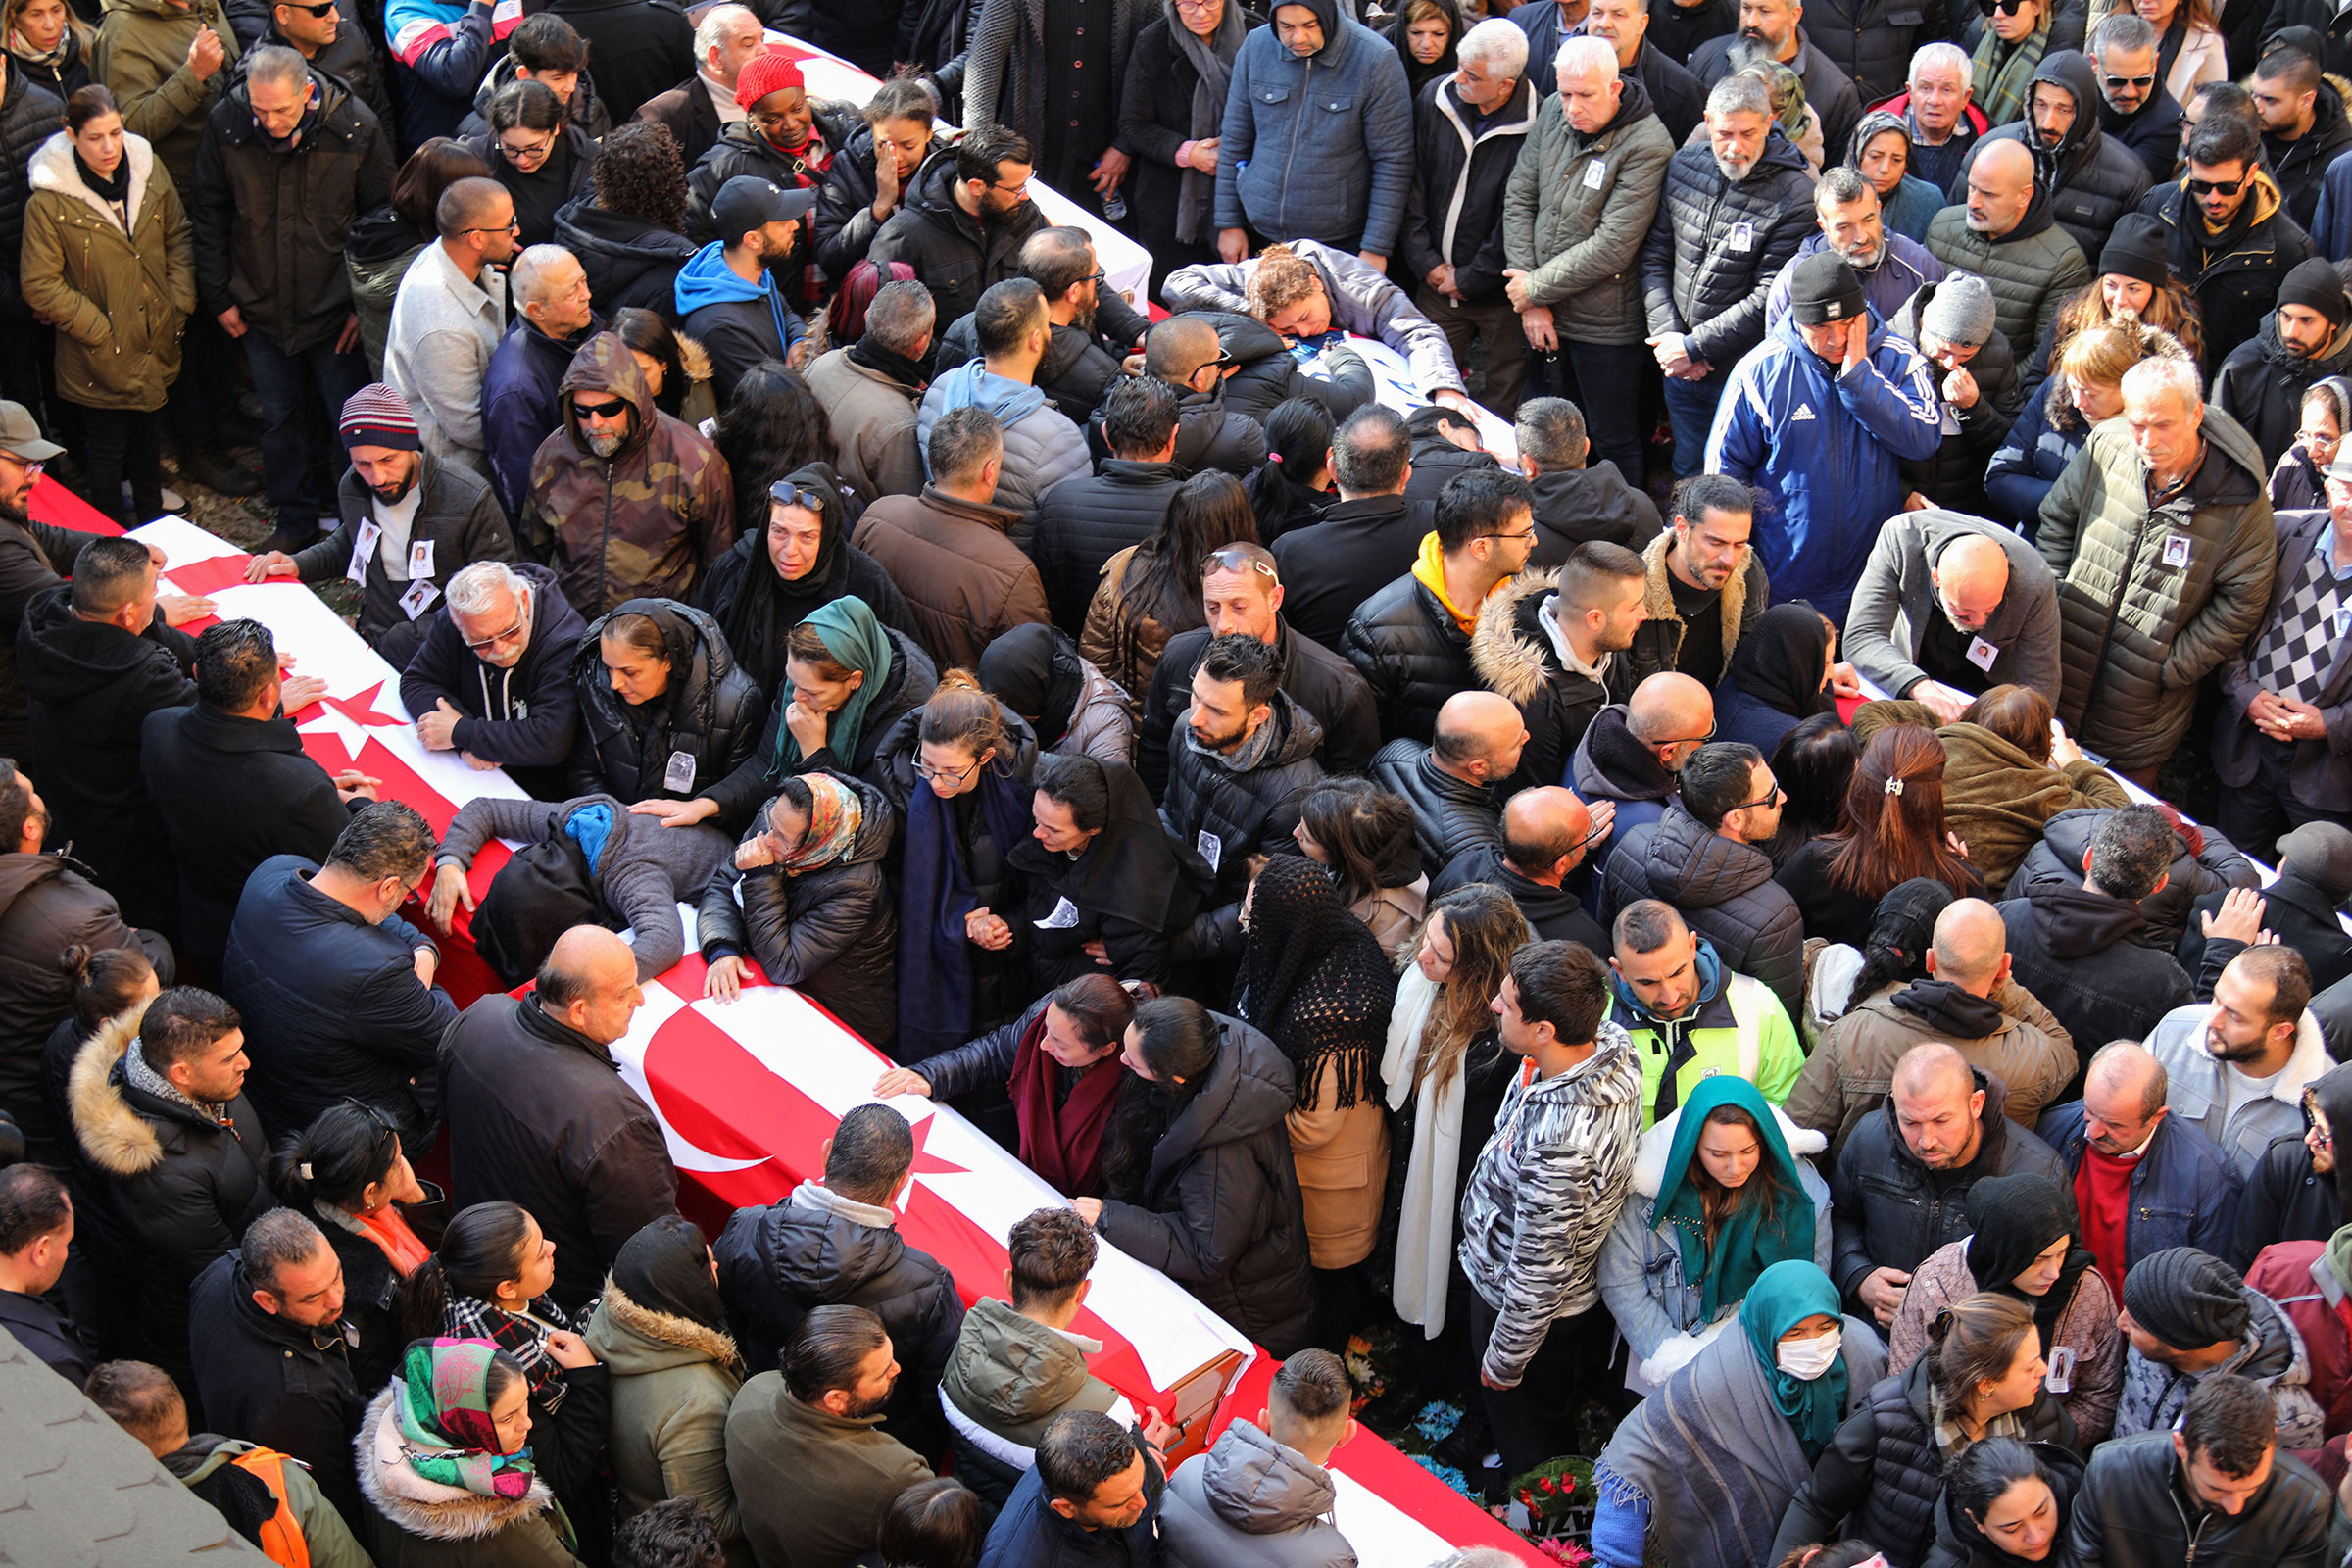 People mourn by their relative's coffin during the funeral of Cypriot students killed in an earthquake that hit Turkey, in the eastern city of Famagusta, in the breakaway Turkish Cypriot statelet of northern Cyprus, on Feb. 11, 2023. (Birol Bebek—AFP/Getty Images)